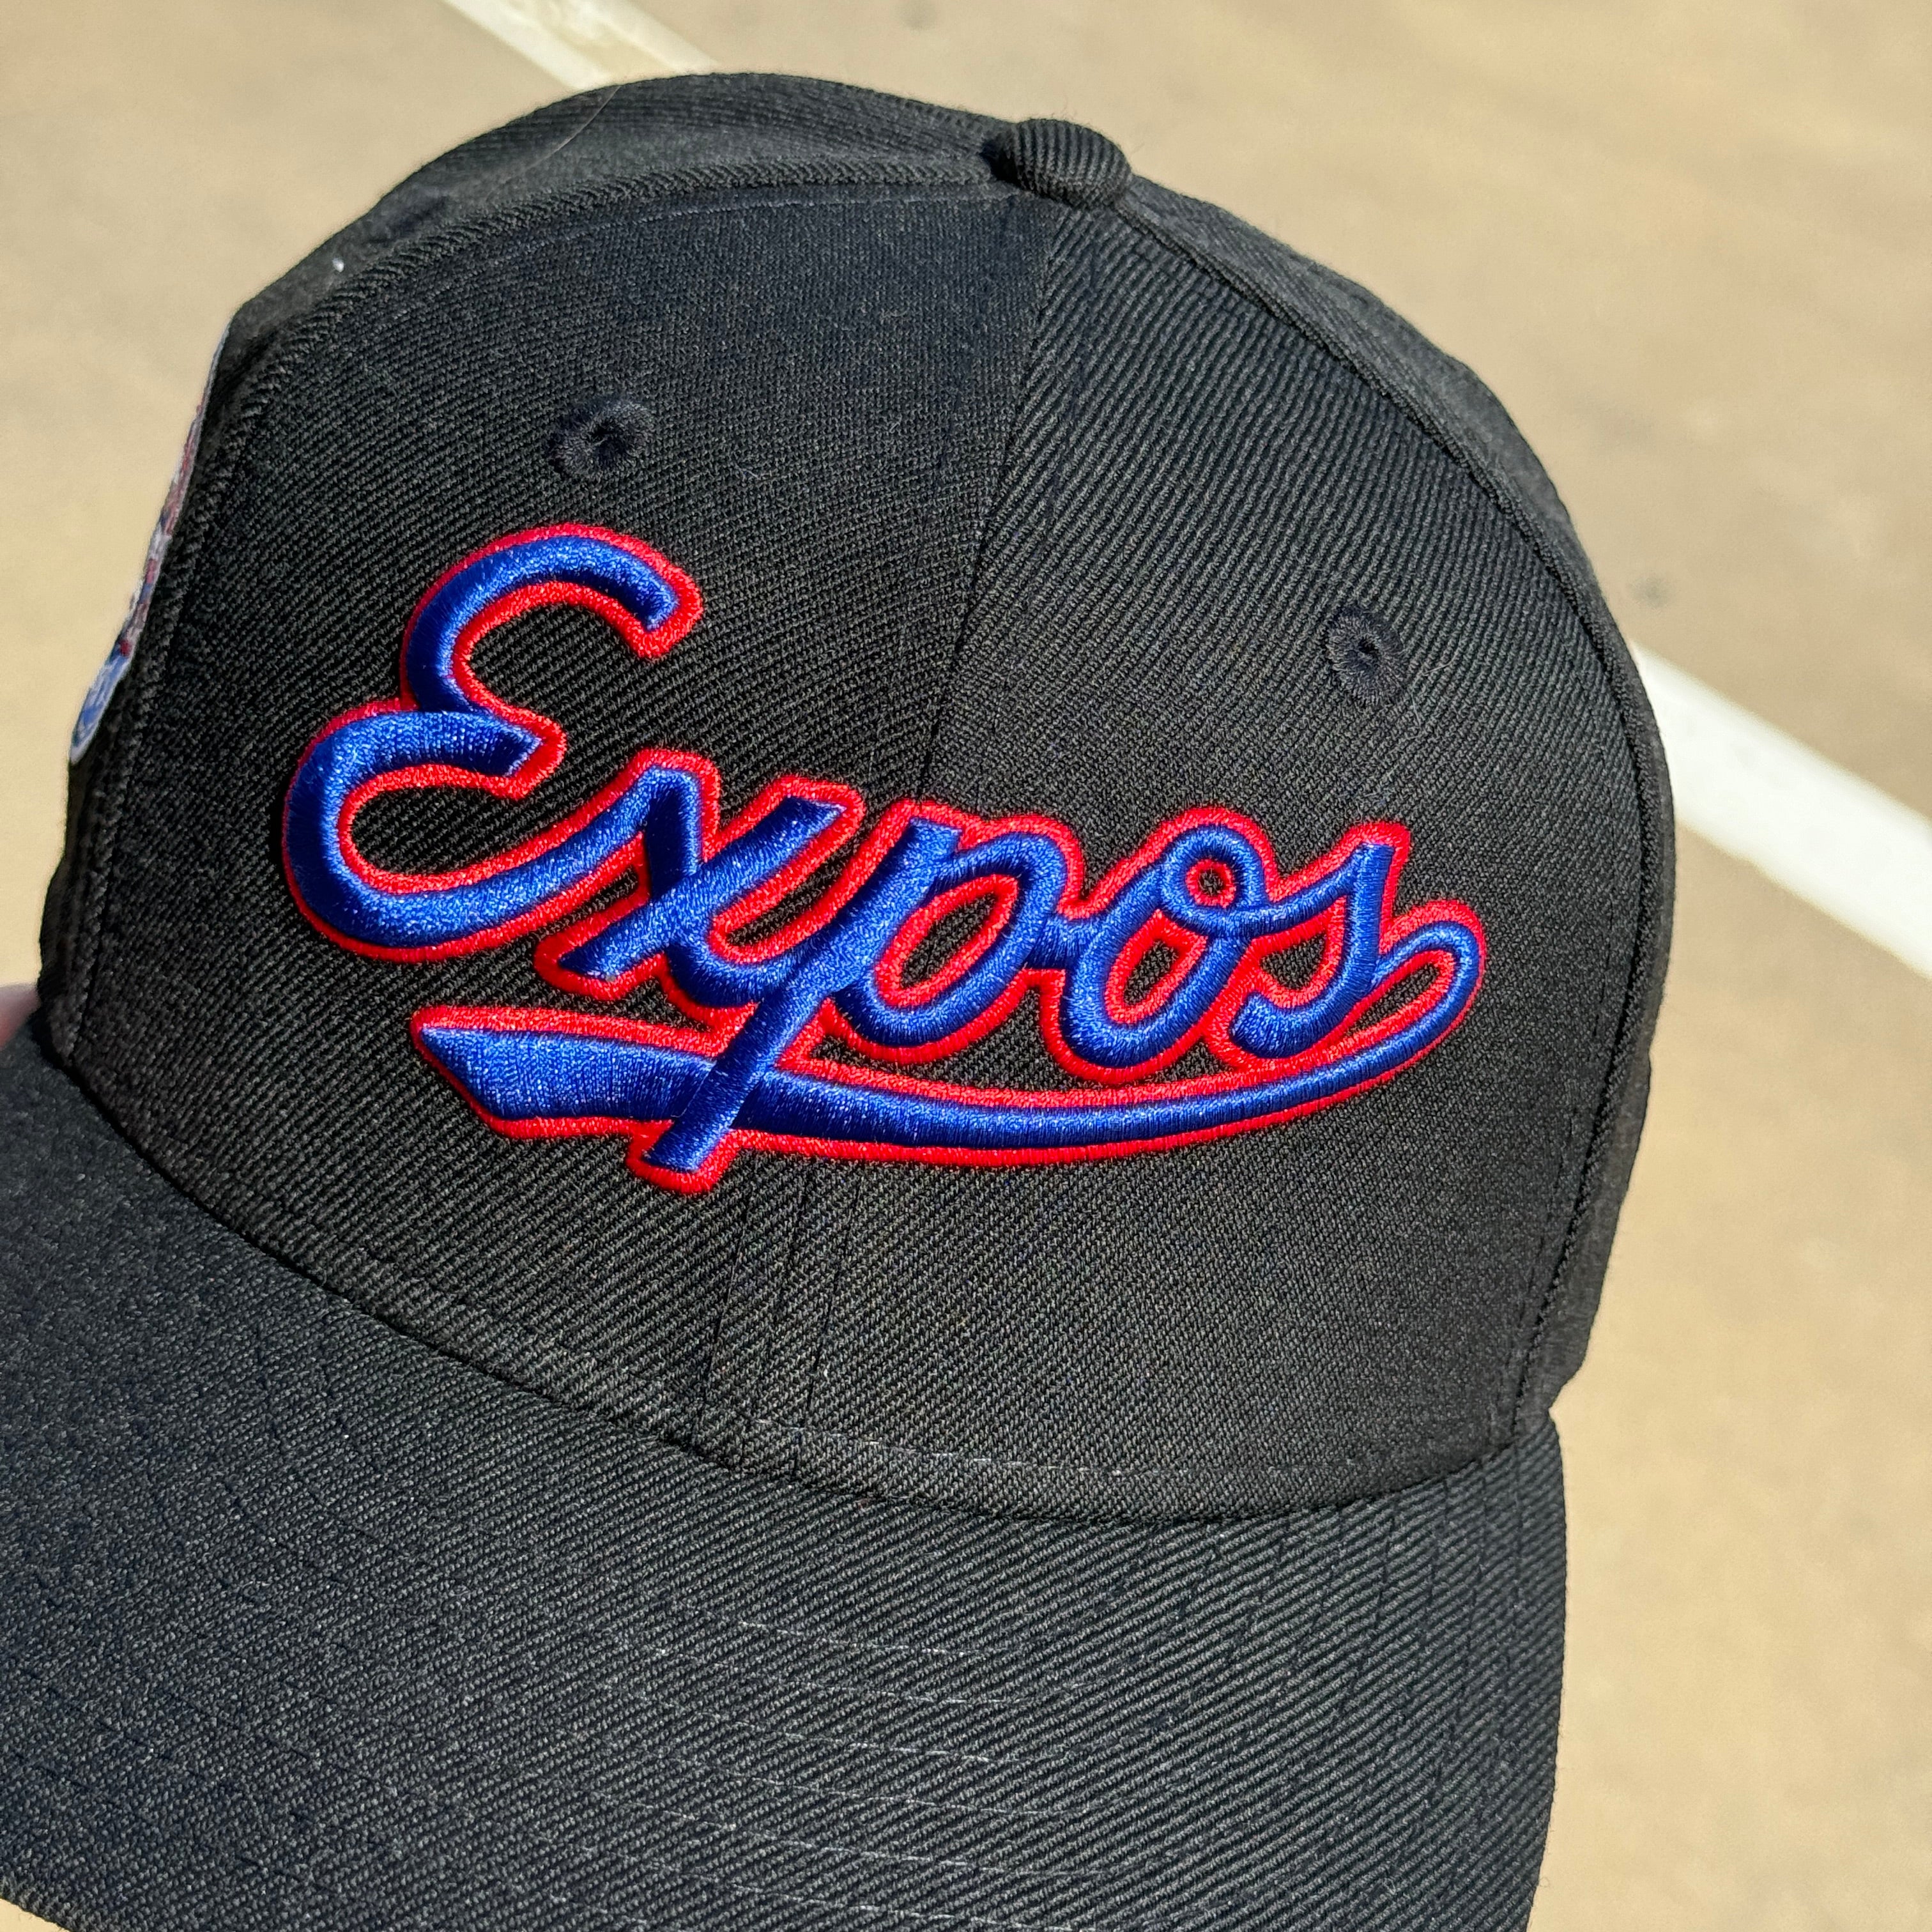 USED 1/8 Black Montreal Toronto Expos 25th Anniversary 59fifty New Era Fitted Hat Cap